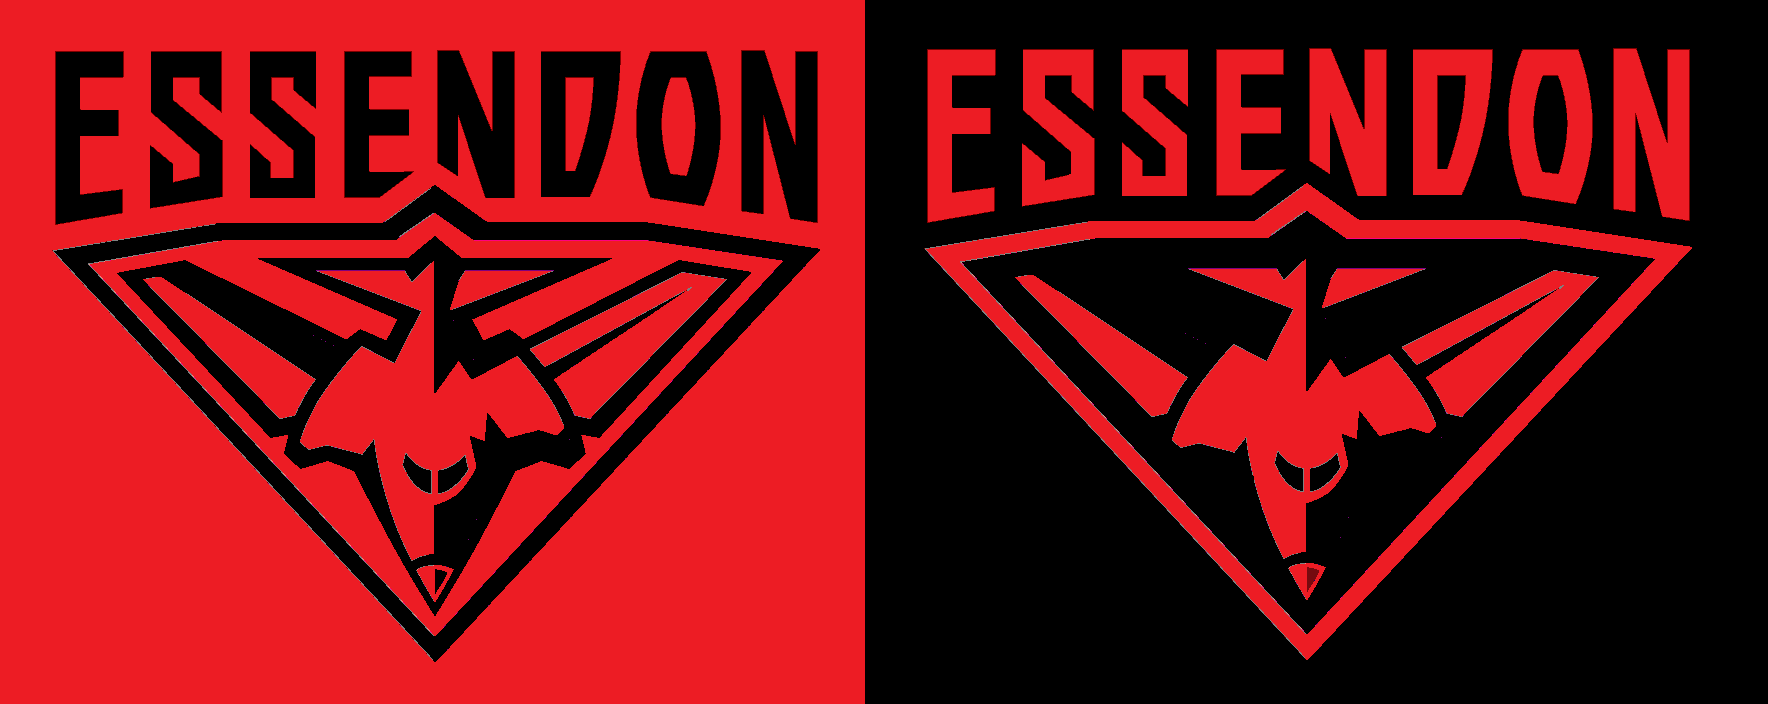 Essendon Logo - i like essendon's logo but not the grey. i think it works just as